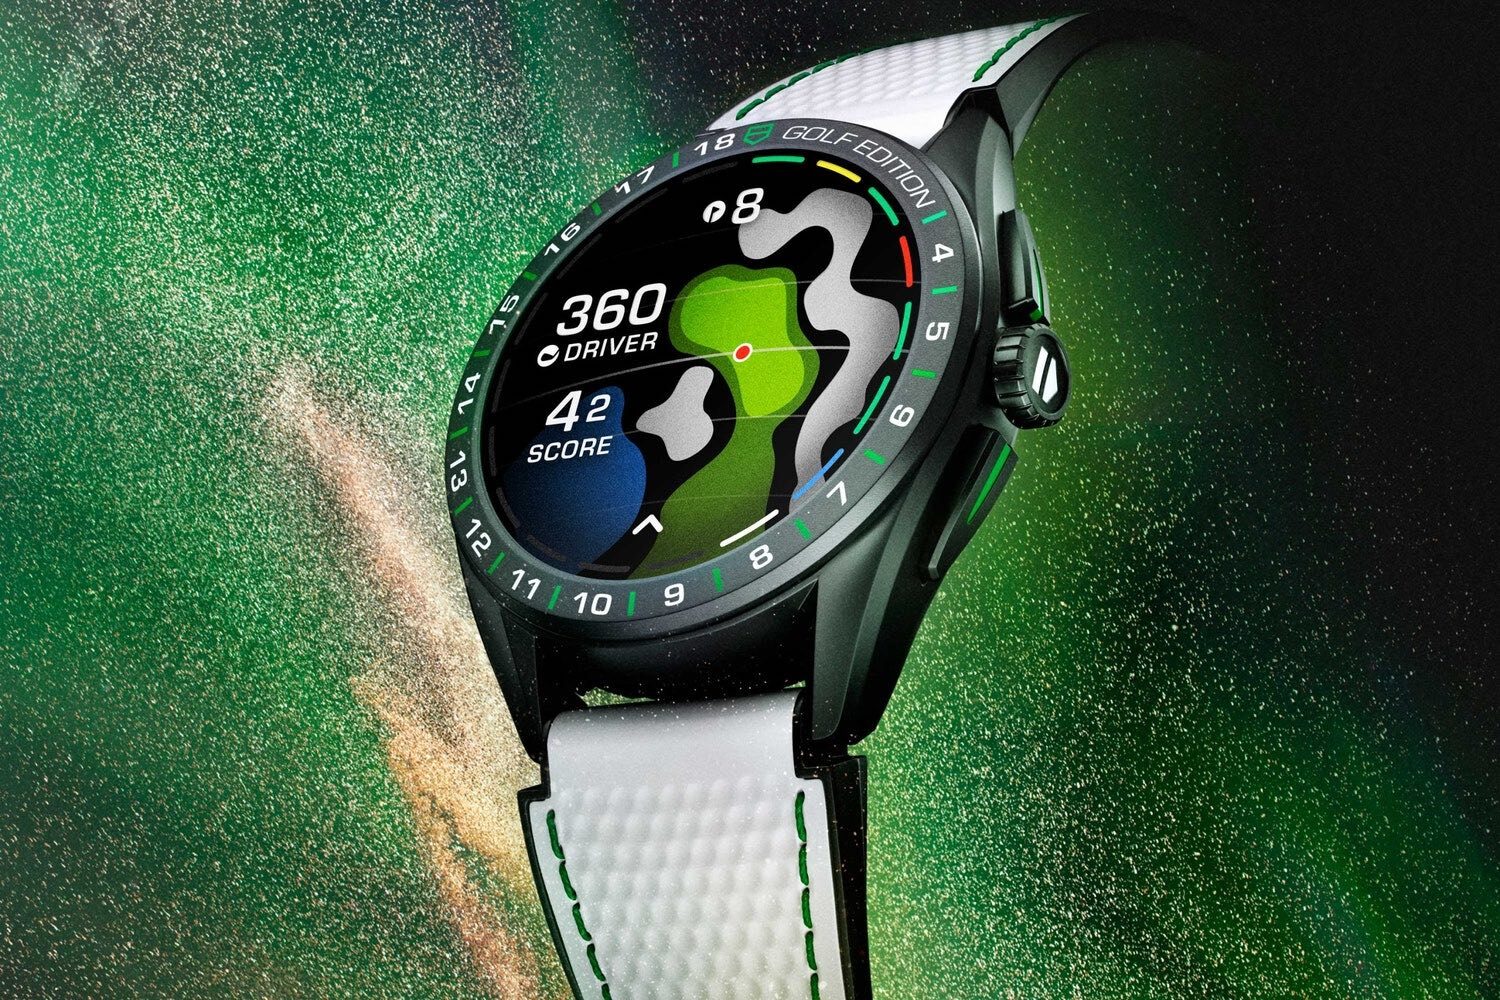 TAG Heuer Connected Watch, the first luxury connected watch - LVMH